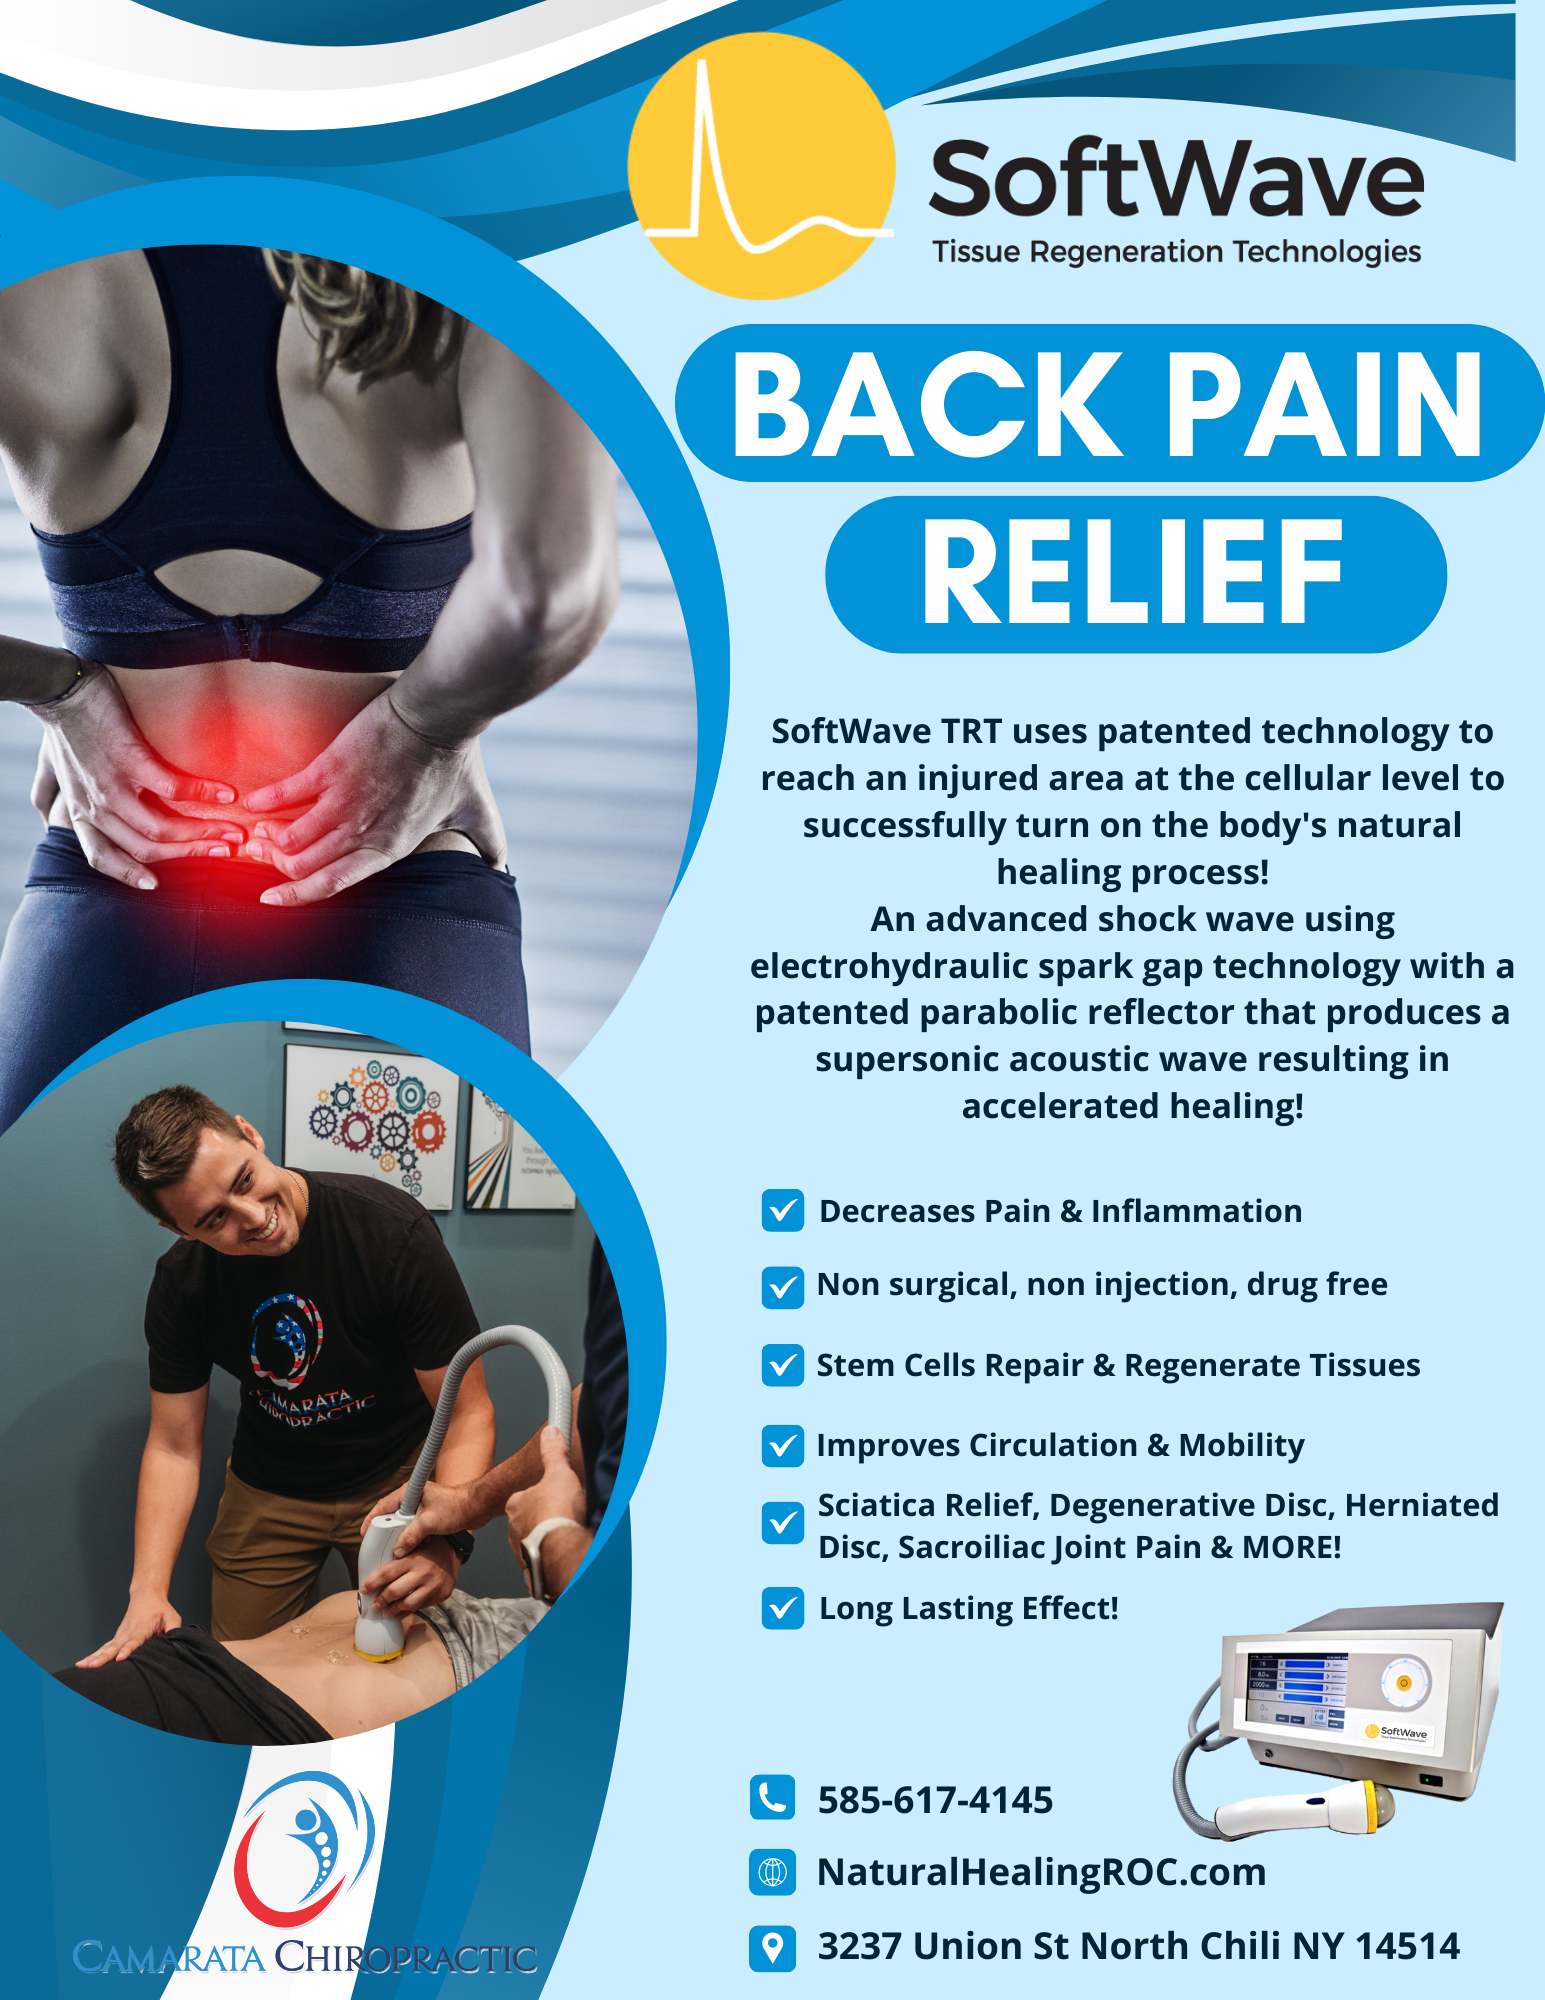 SoftWave TRT: The New Non-Surgical, Drug-Free Back Pain Relief Option at Camarata Chiropractic & Wellness in Rochester, NY